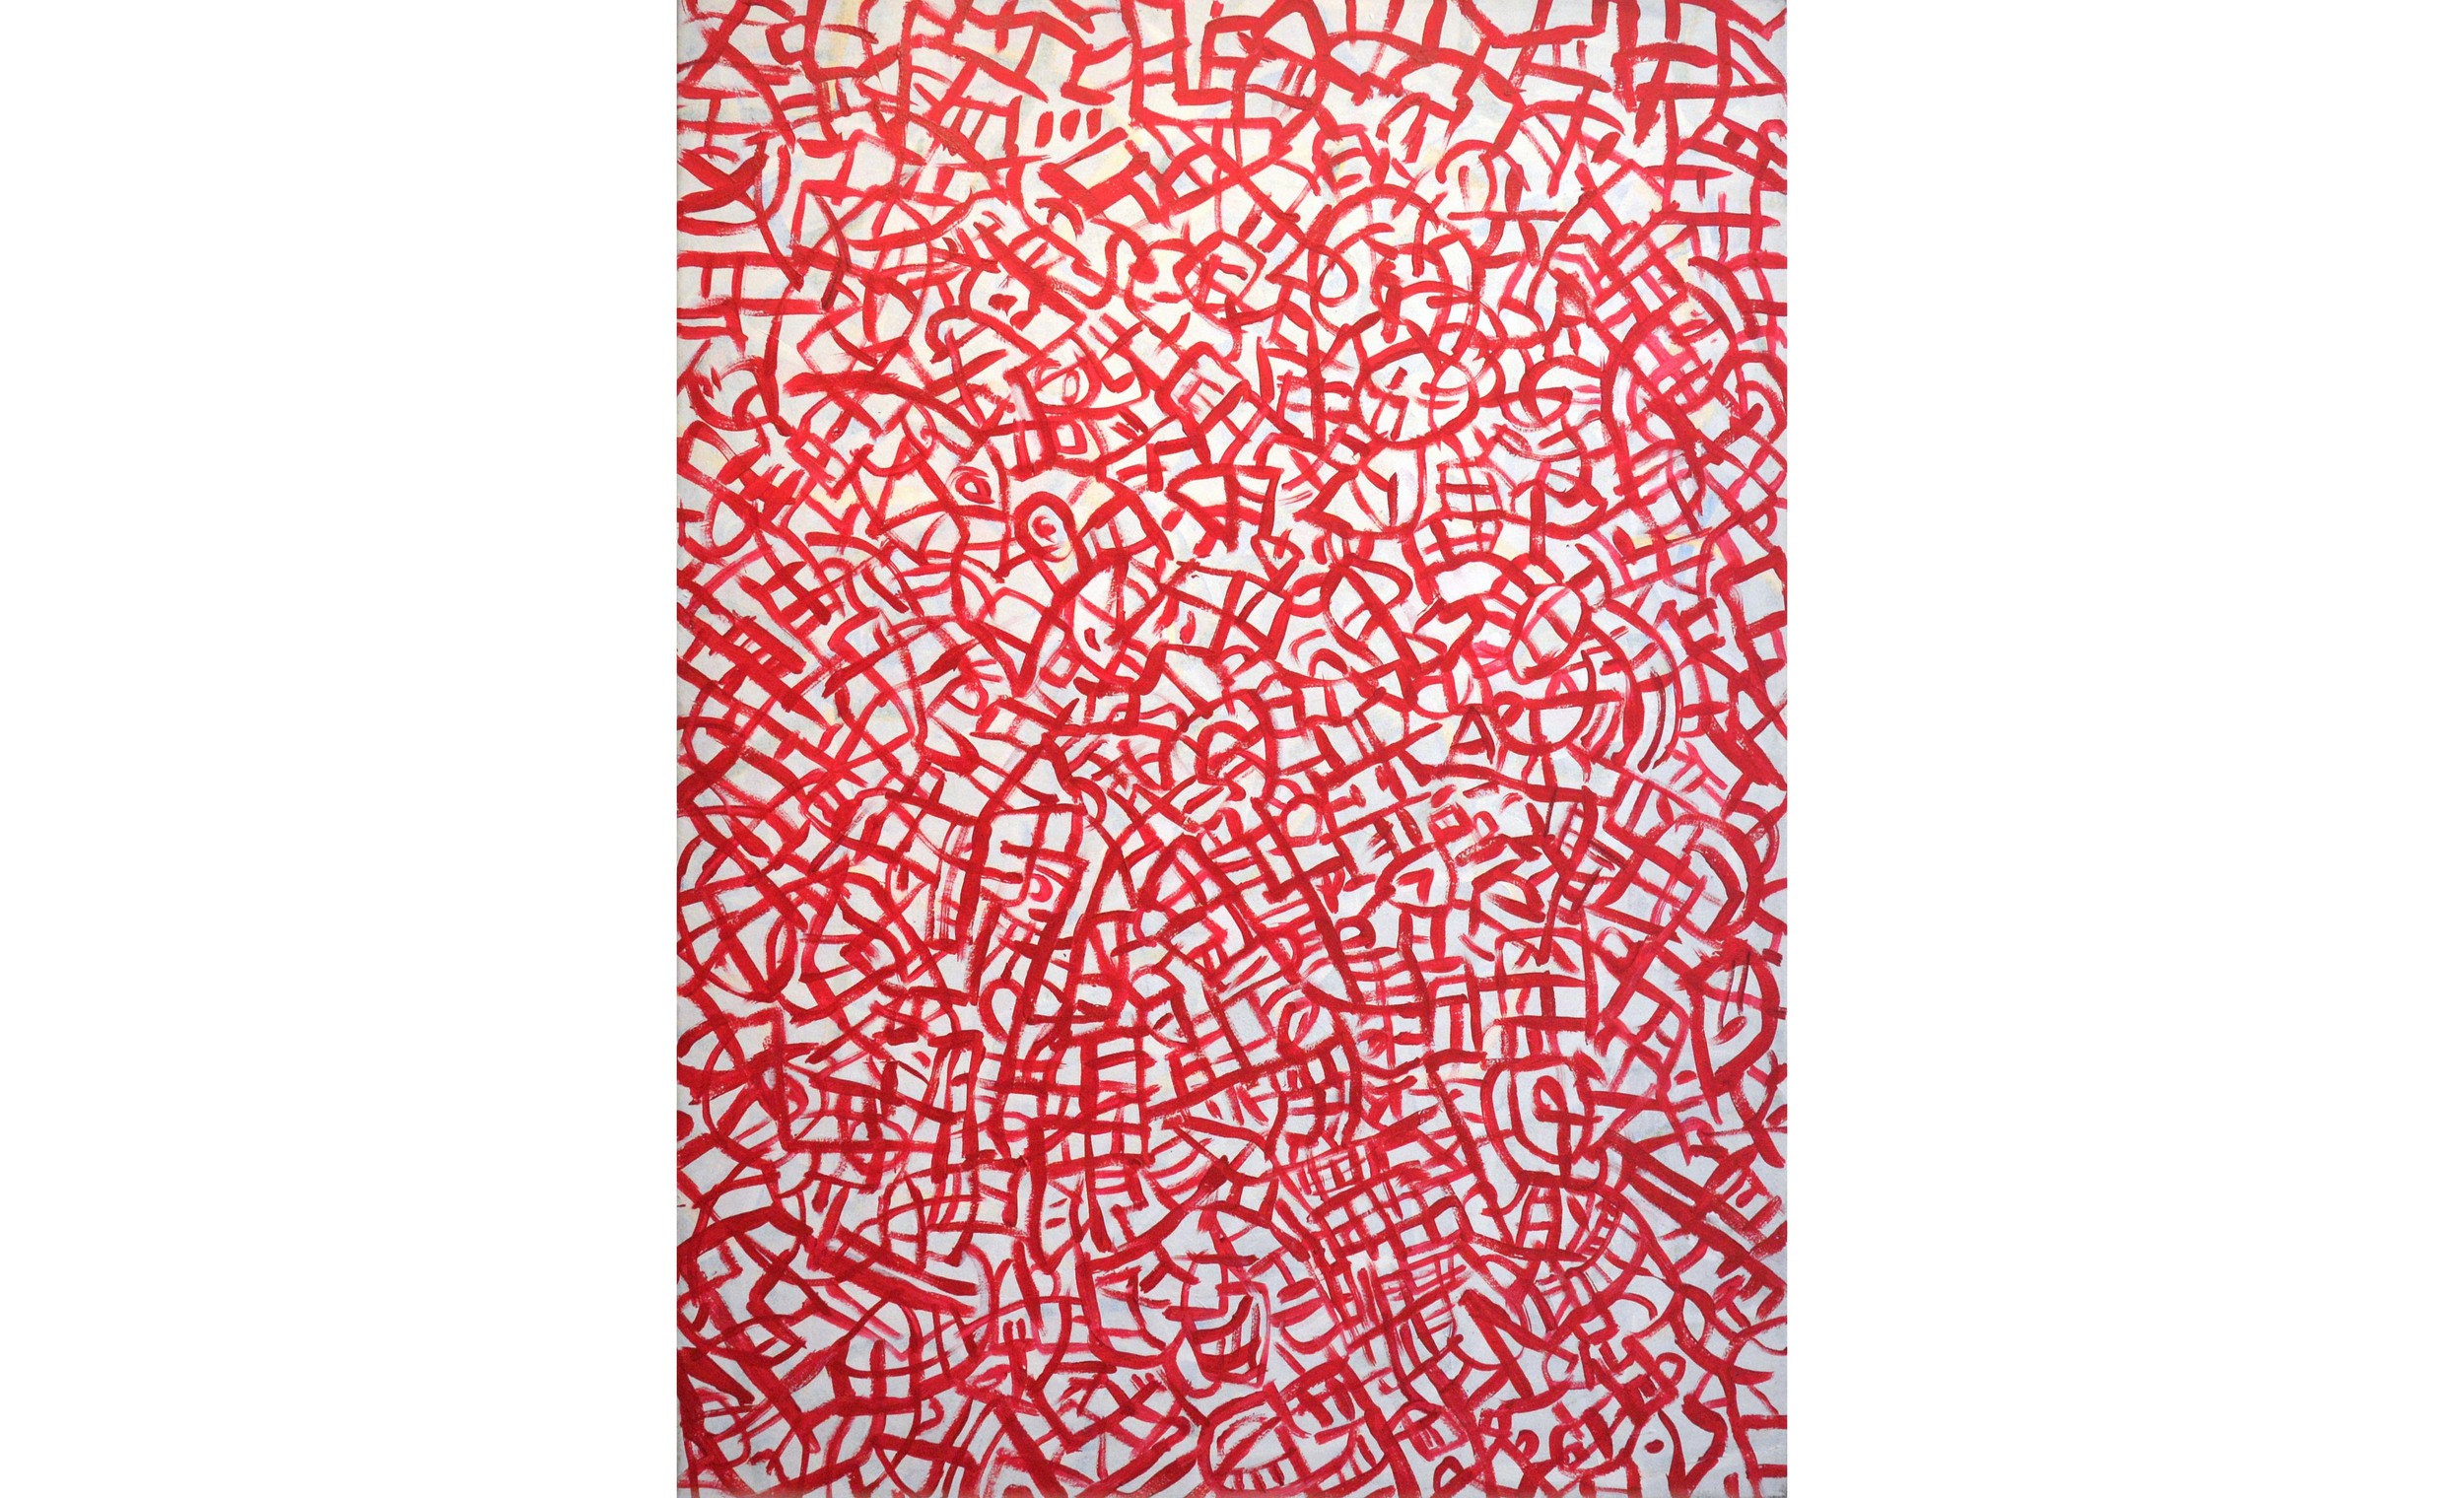 Sound in Red, Acrylic on canvas, 60” x 44”